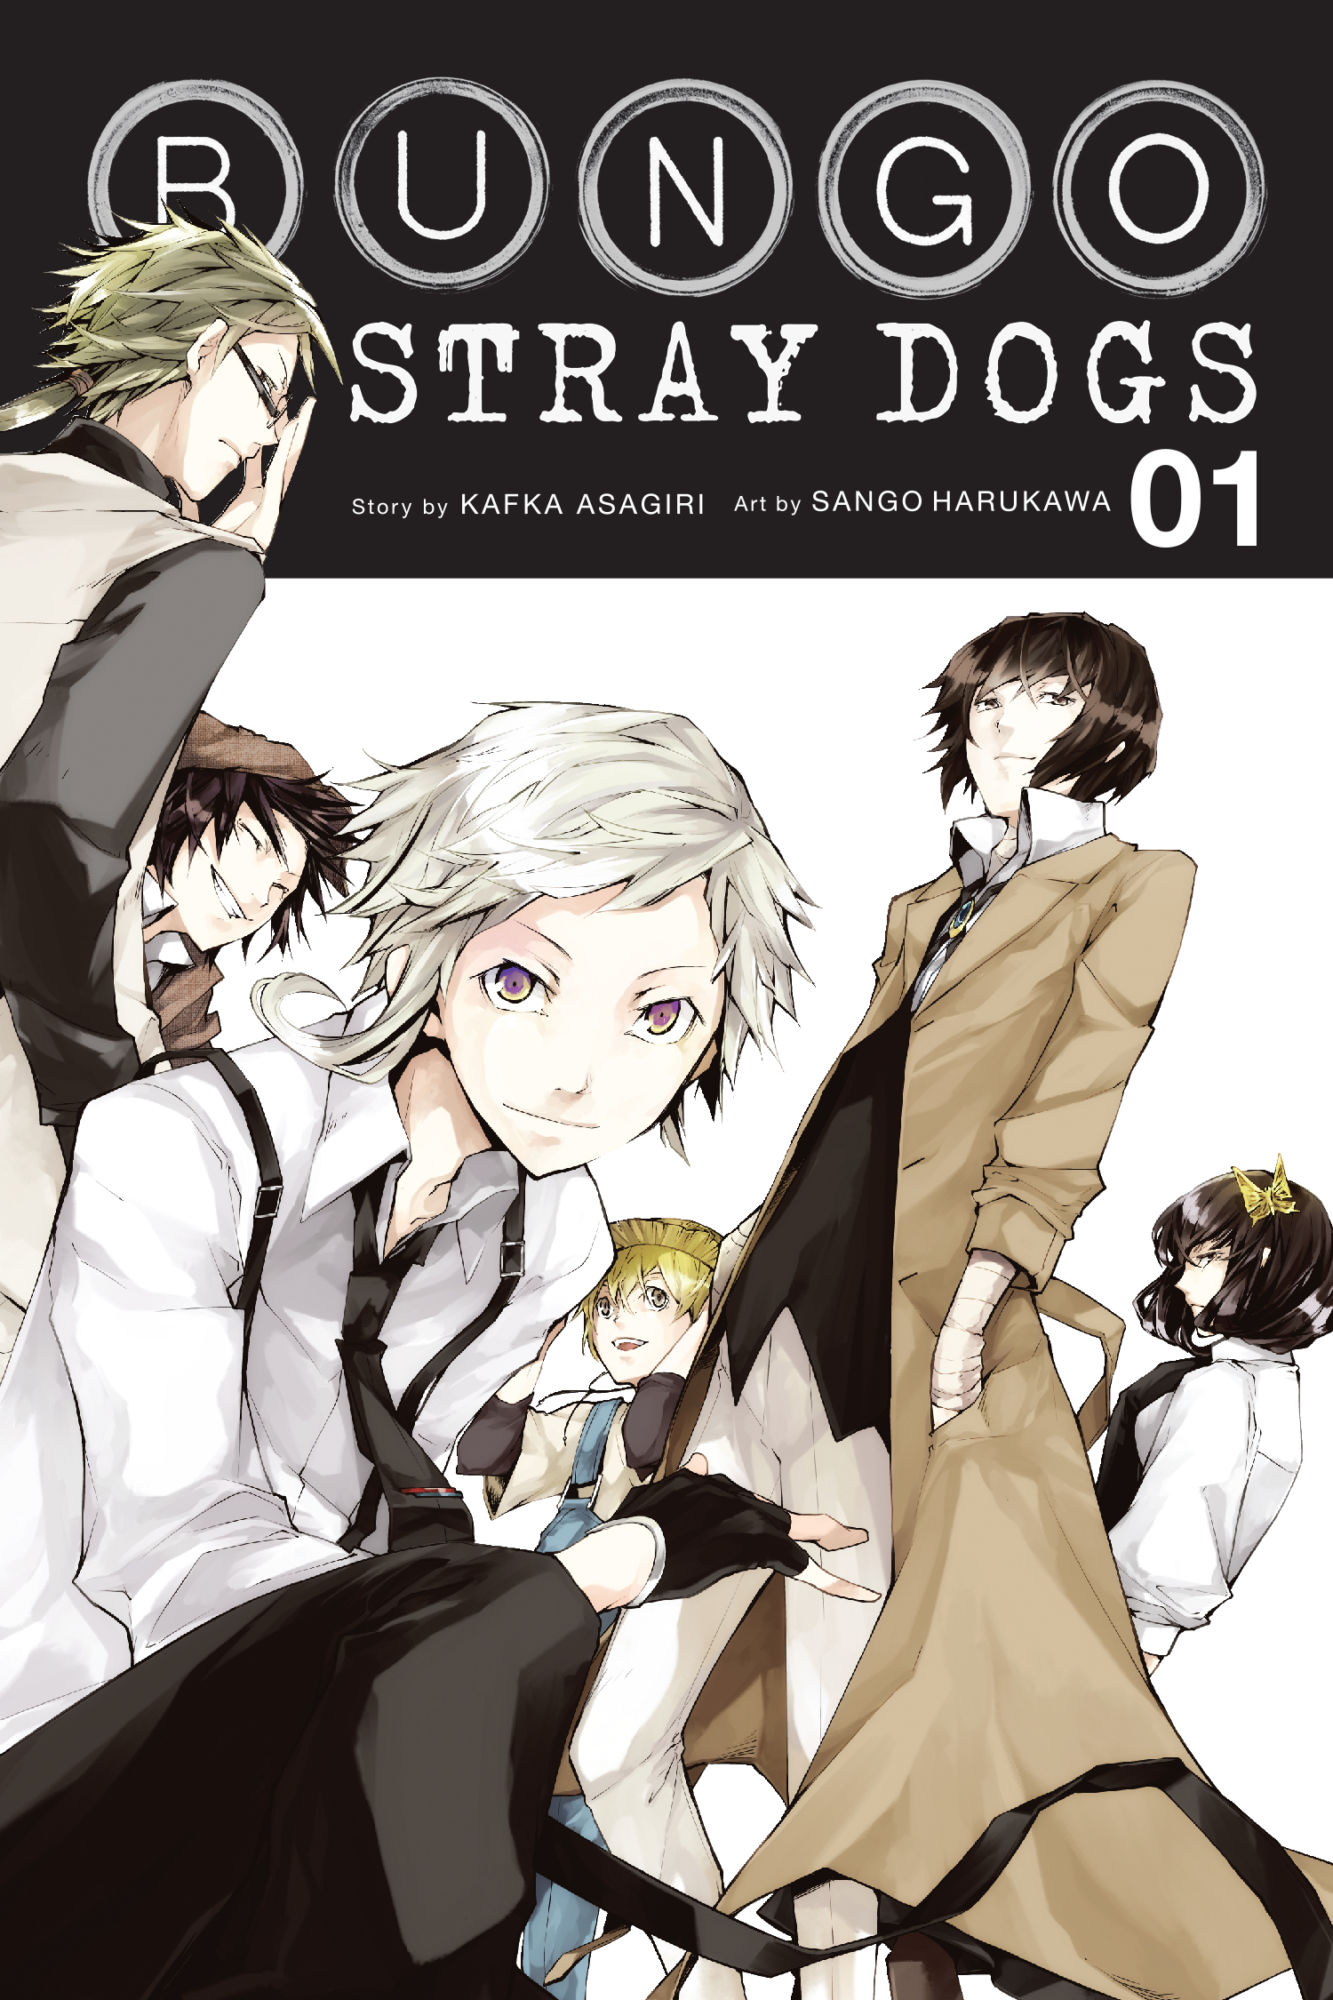 Bungo Stray Dogs  streaming tv show online